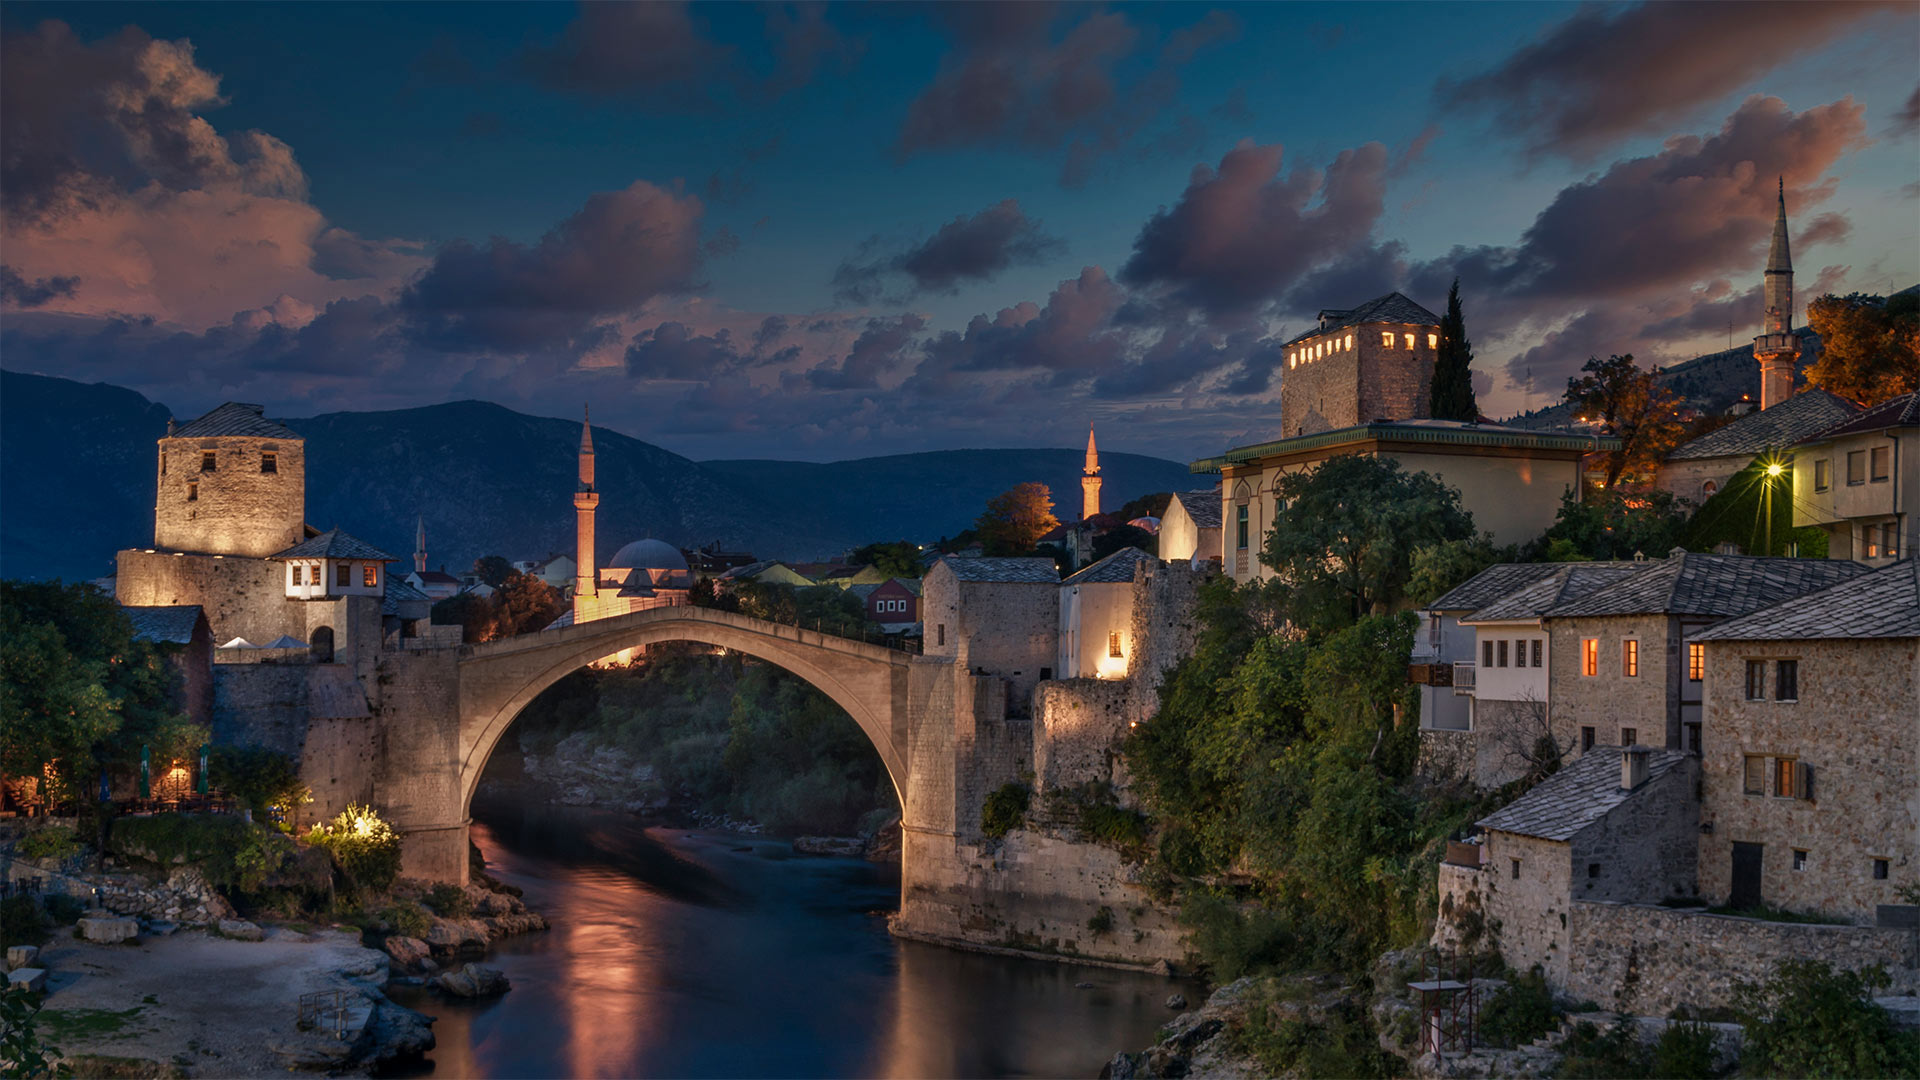 Stari Most in Mostar, Bosnia and Herzegovina - Ayhan Altun/Getty Images)